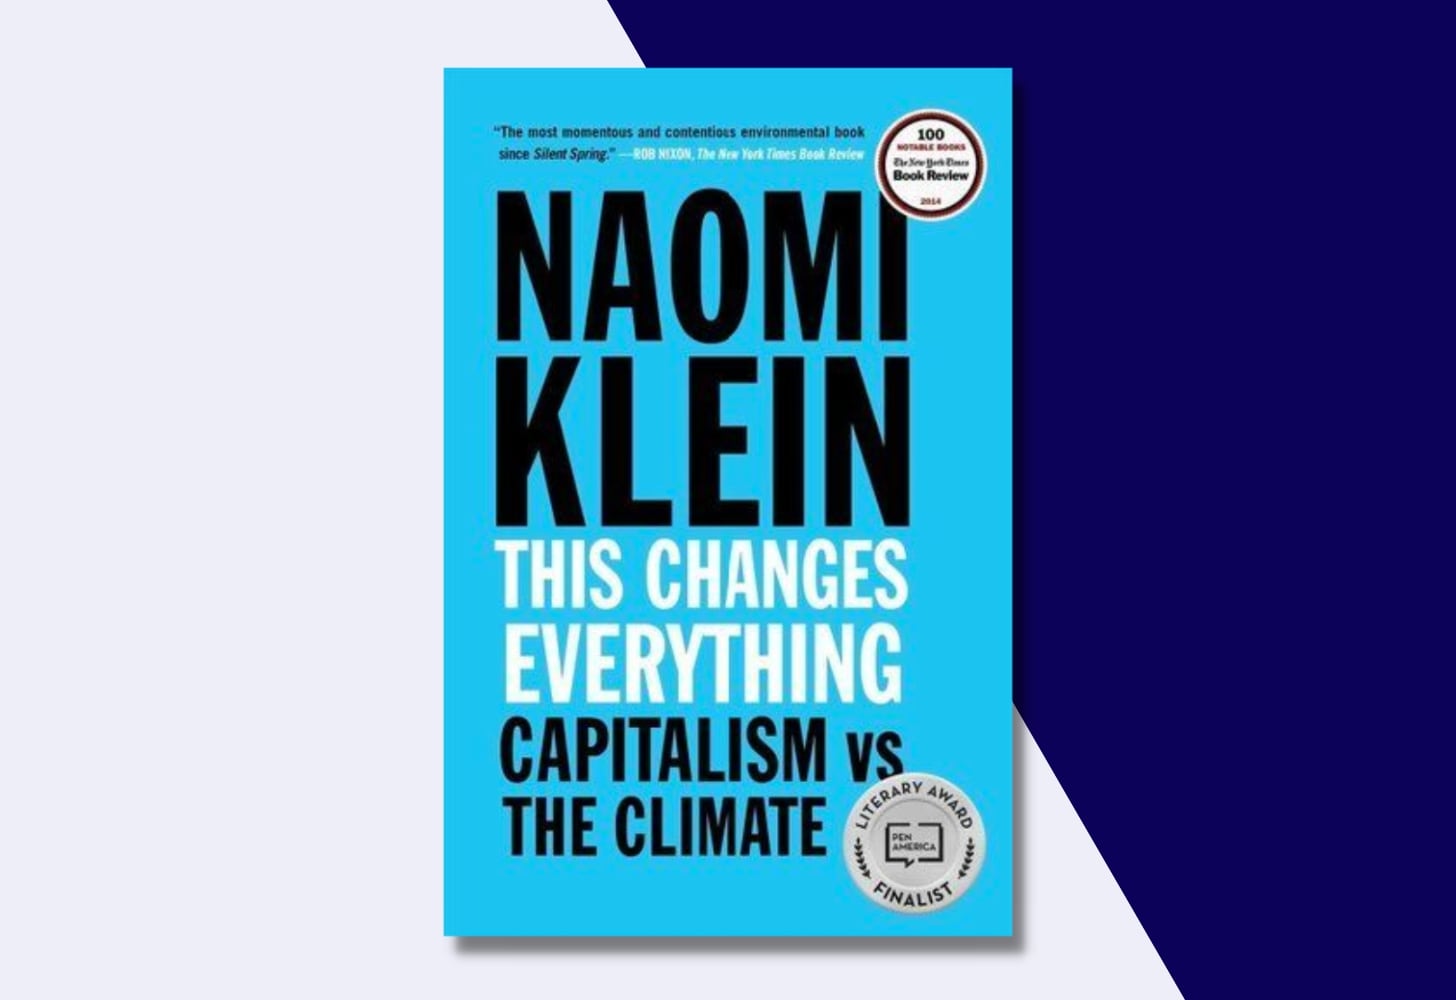 “This Changes Everything: Capitalism vs. the Climate” by Naomi Klien